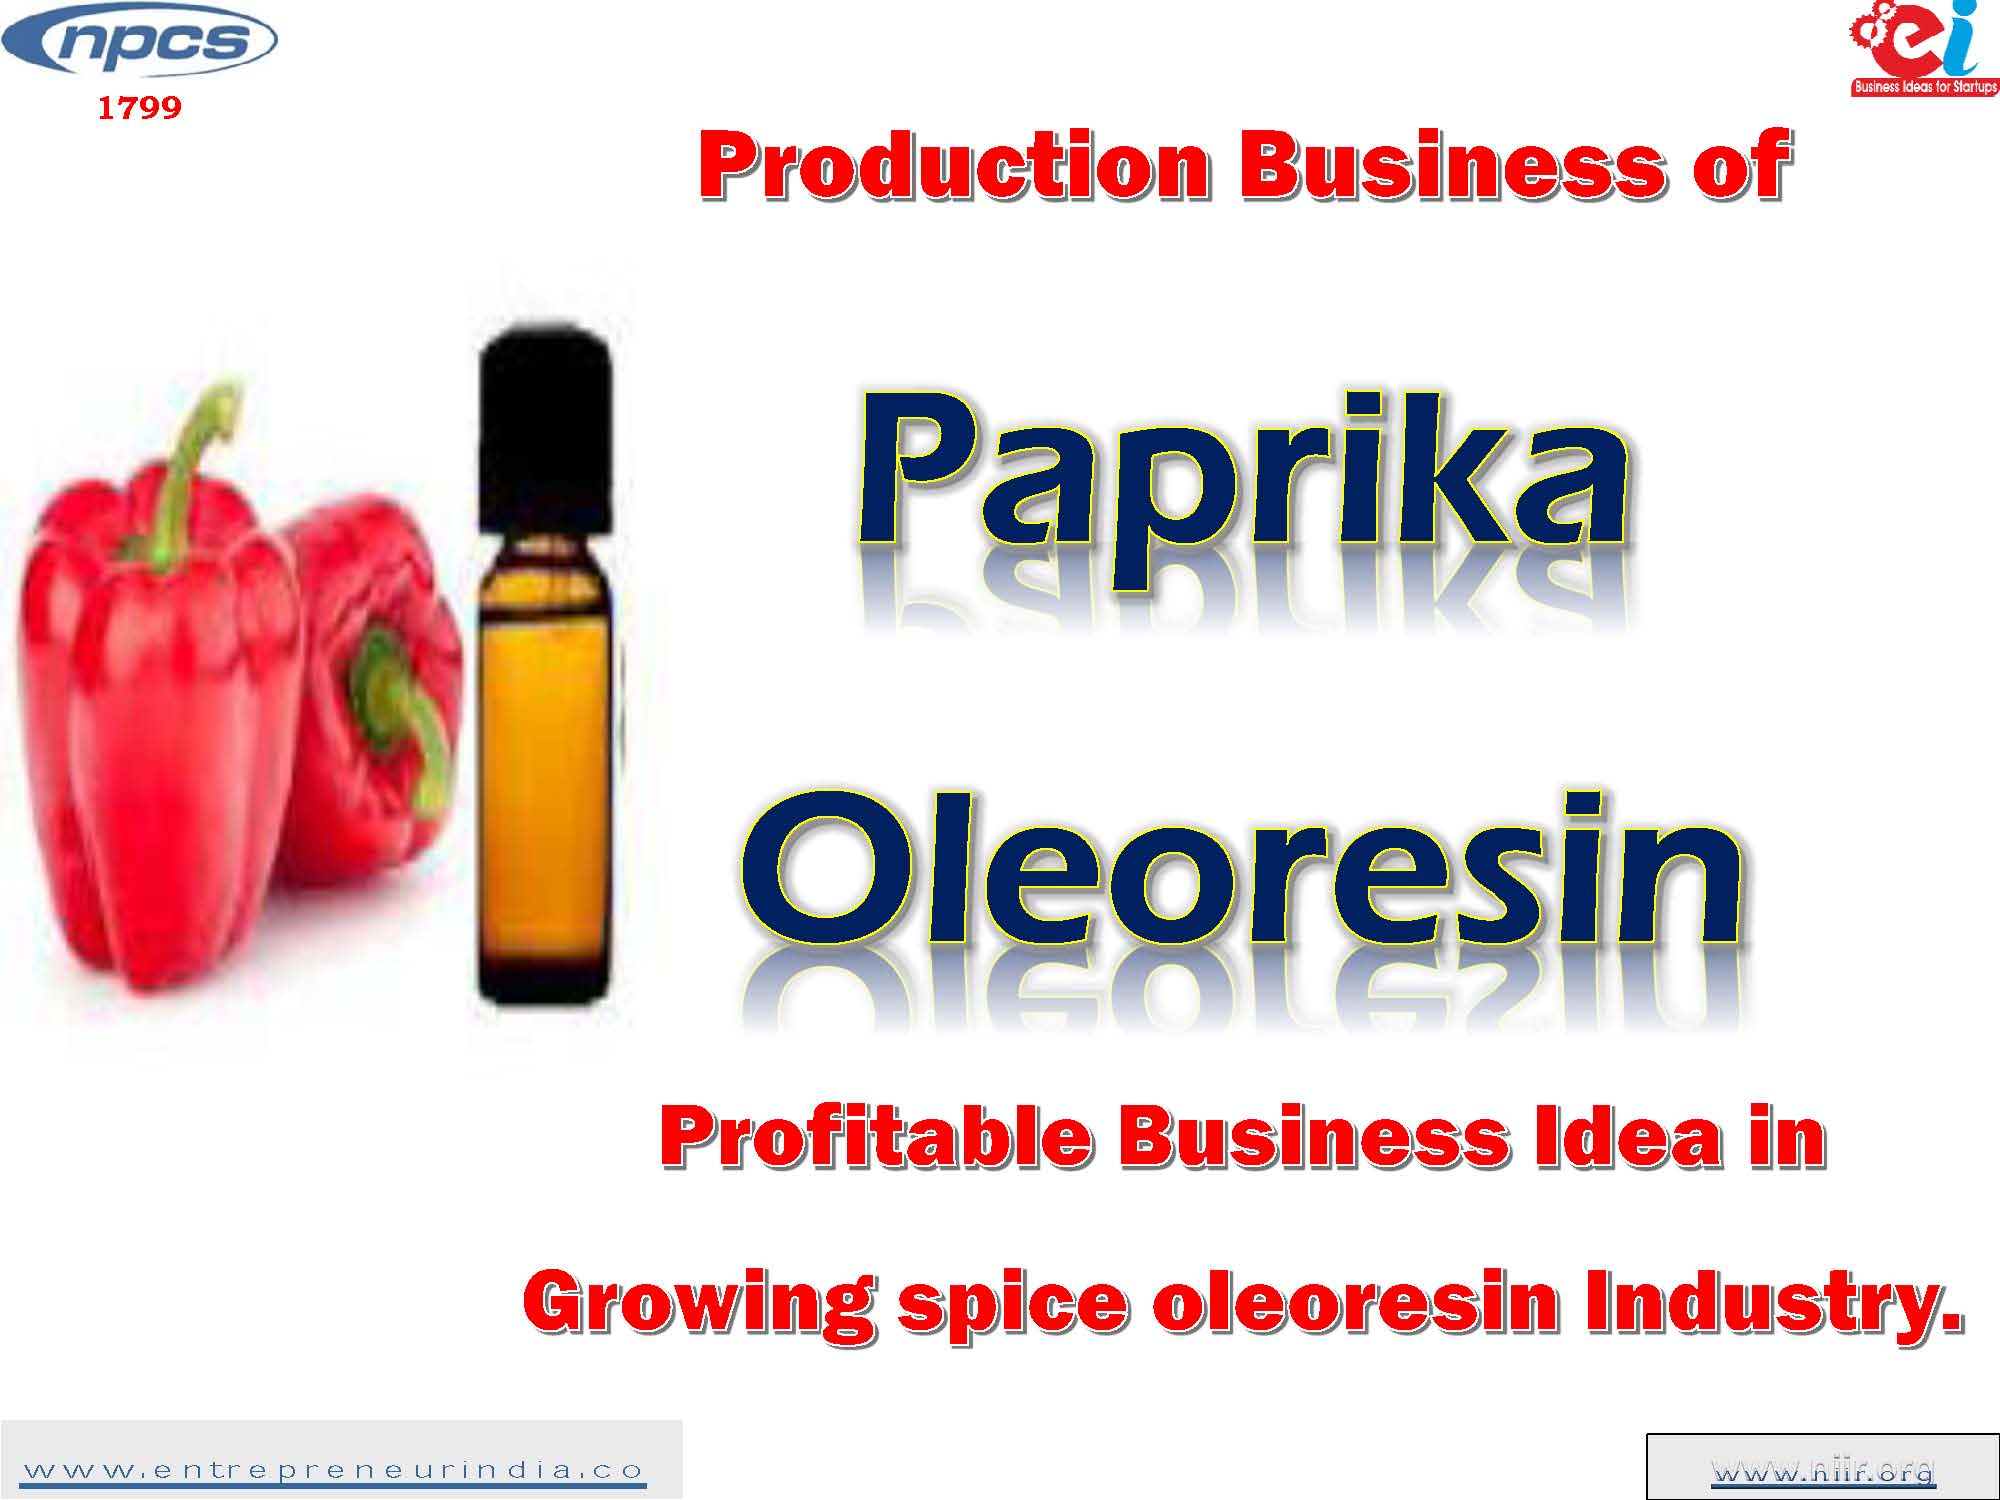 Production Business of Paprika Oleoresin Profitable Business Idea in Growing spice oleoresin Industry